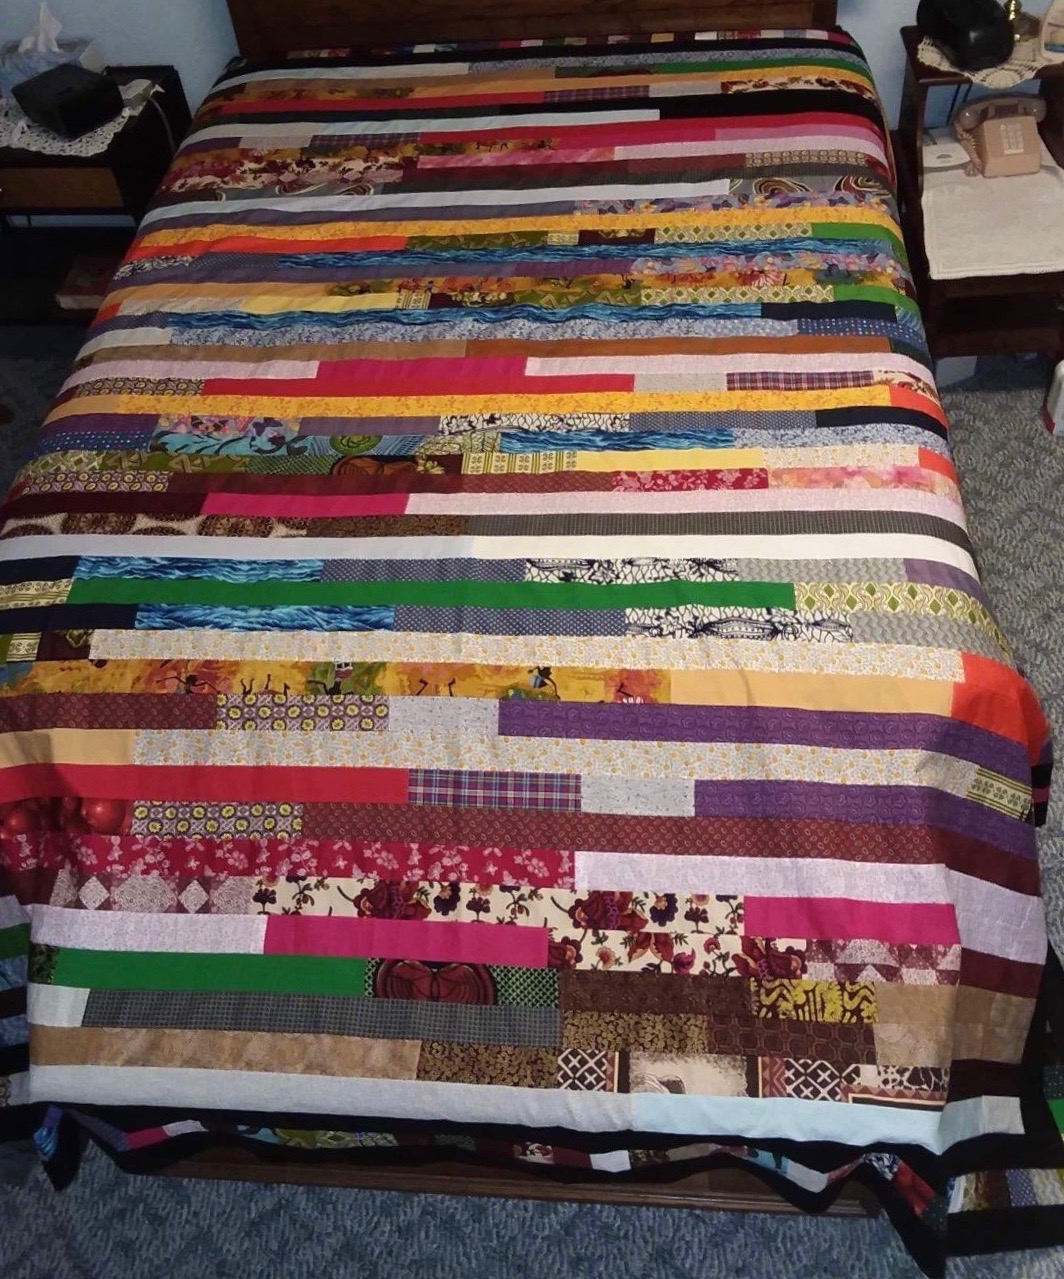  Joseph’s Coat Comforter, Pieced by Mary Gilliom, Reactor Knotted, donated by Silverwood Mennonite Women, 106 x 107”